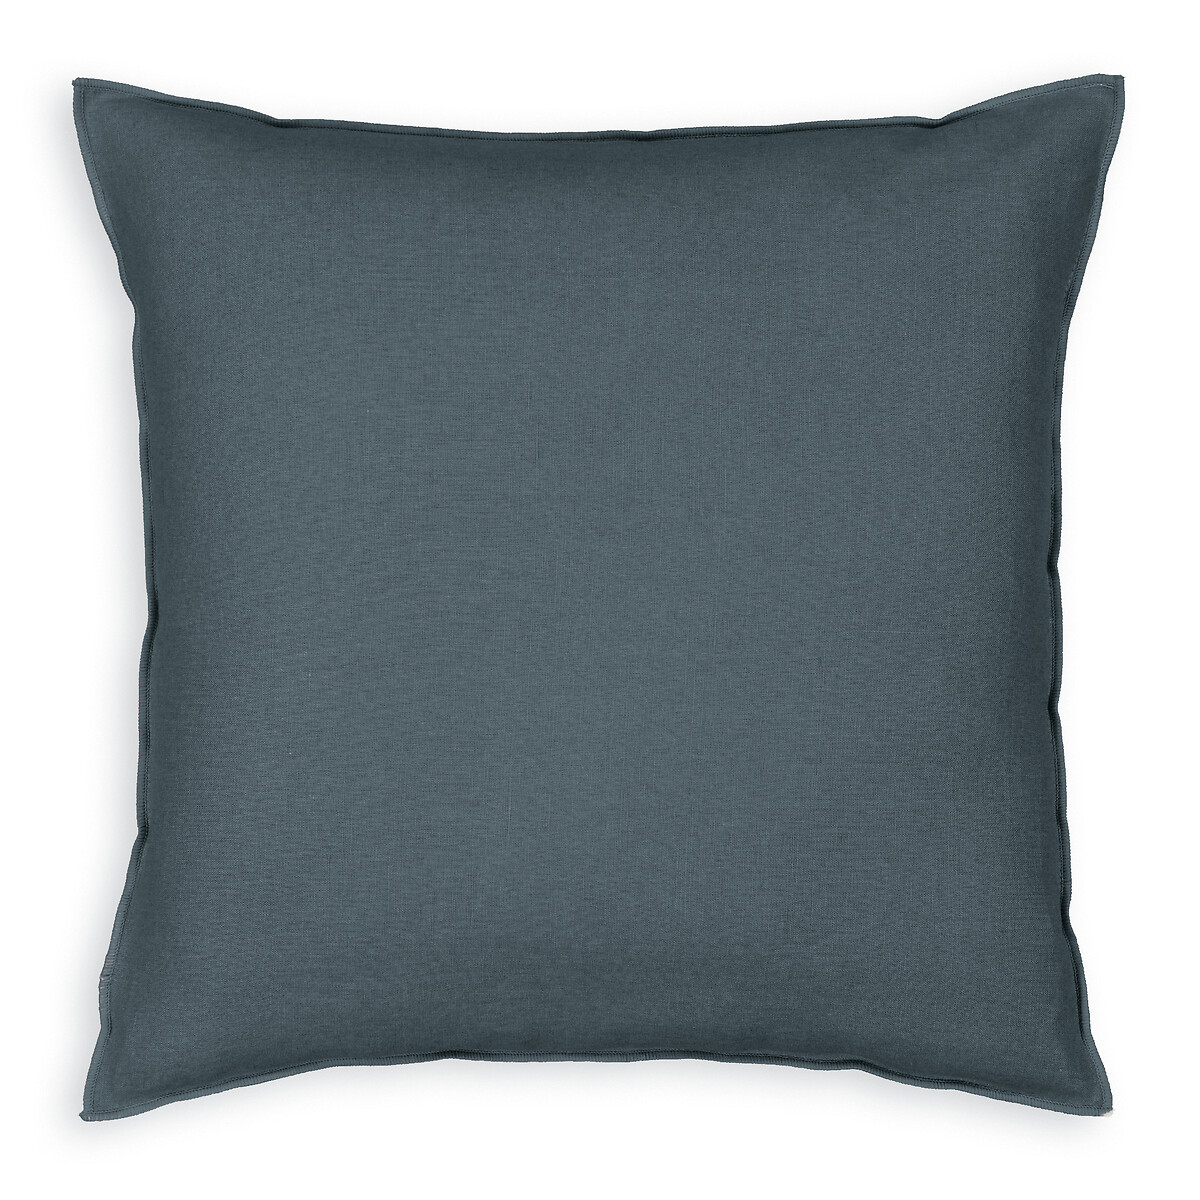 Onega 40 x 40cm 100% Washed Linen Cushion Cover